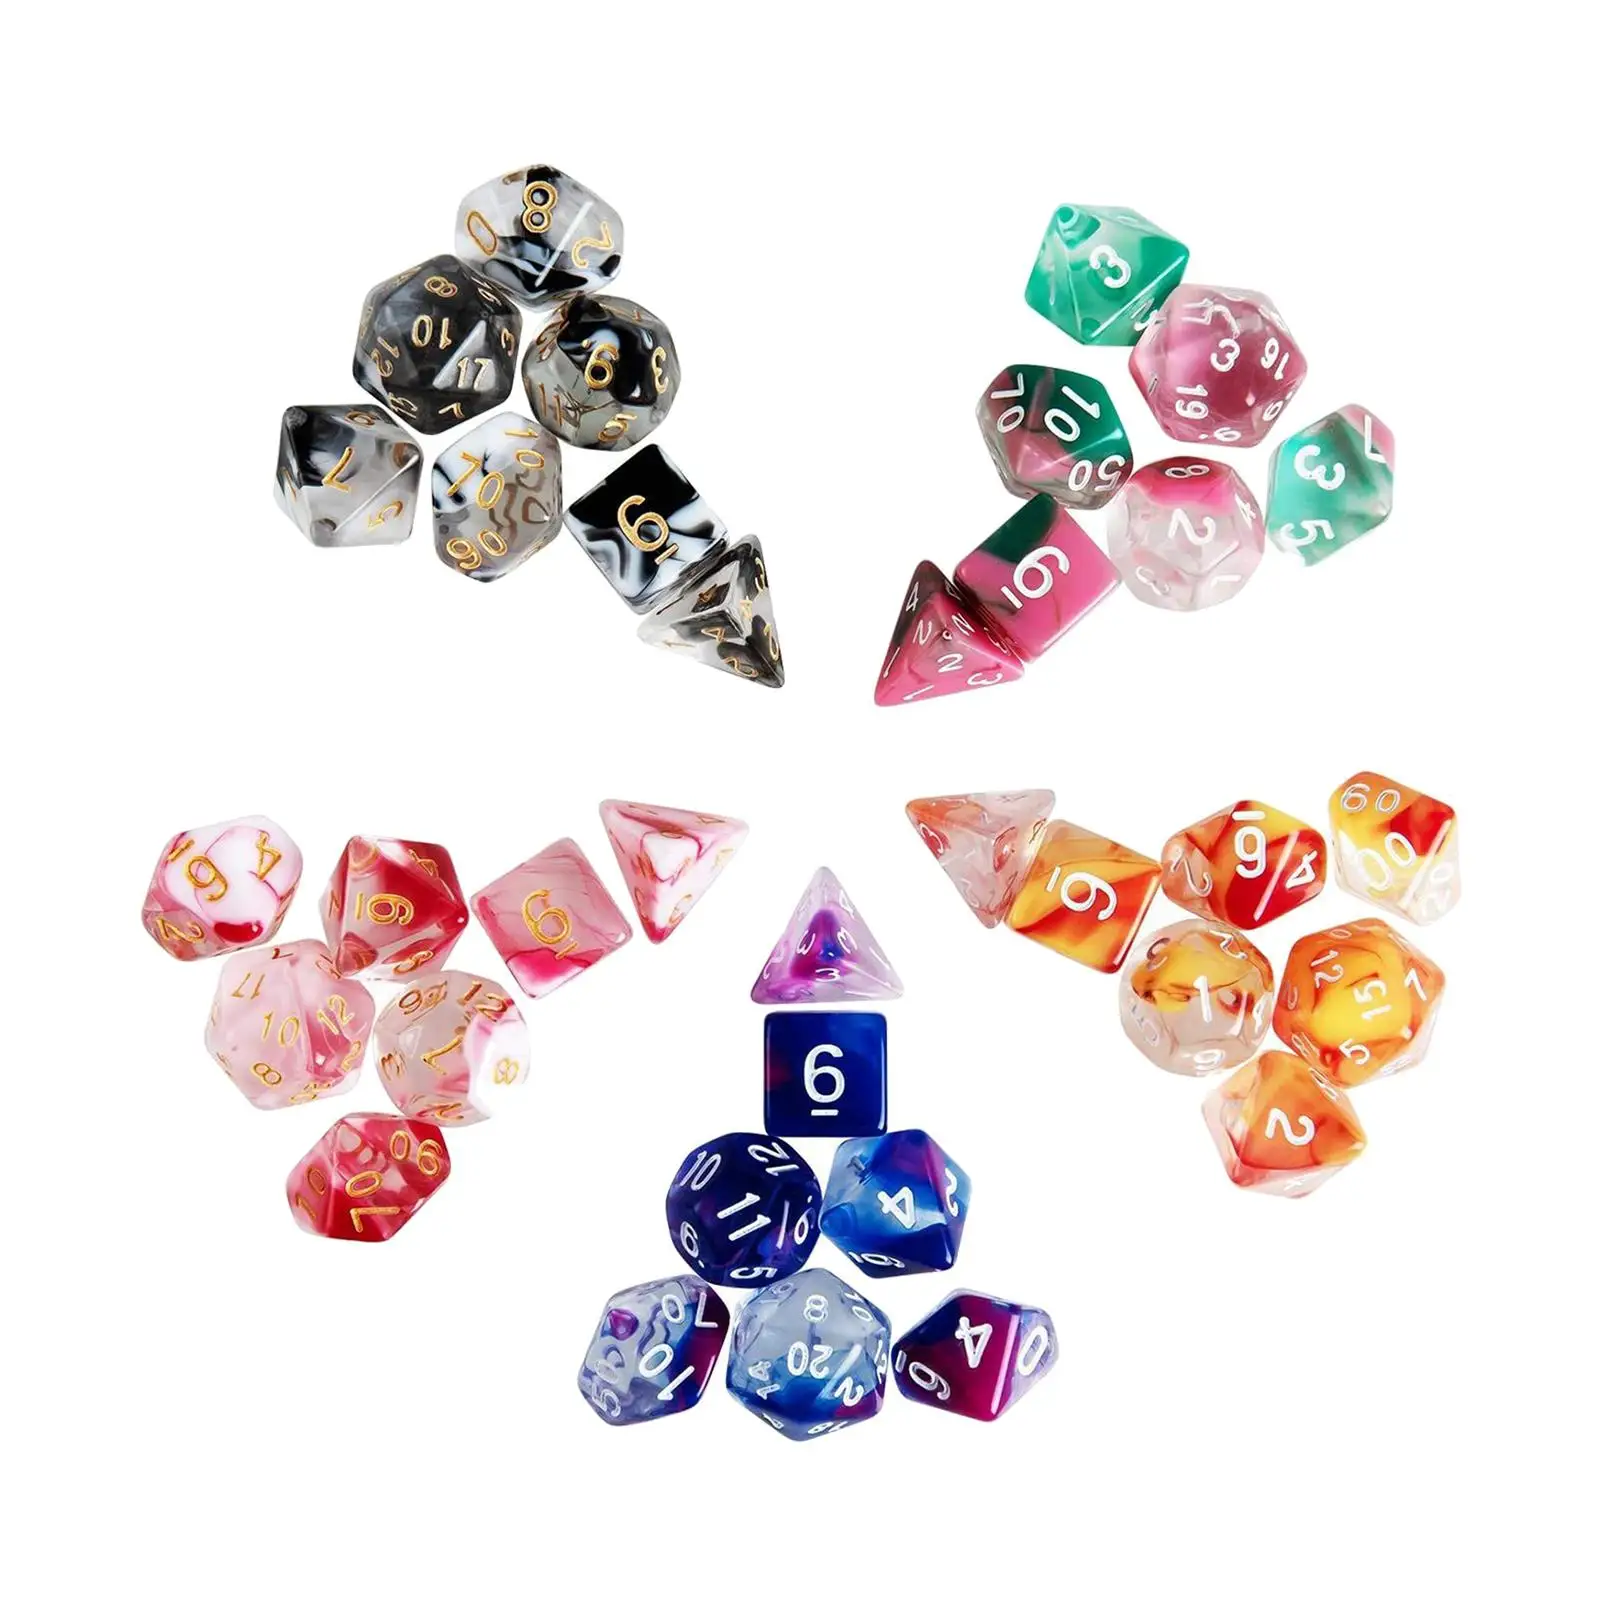 35 Pieces Acrylic Polyhedral Dices Set D4 D8 D10 D12 D20 Bar Toys Entertainment Toys for Card Games RPG Board Game